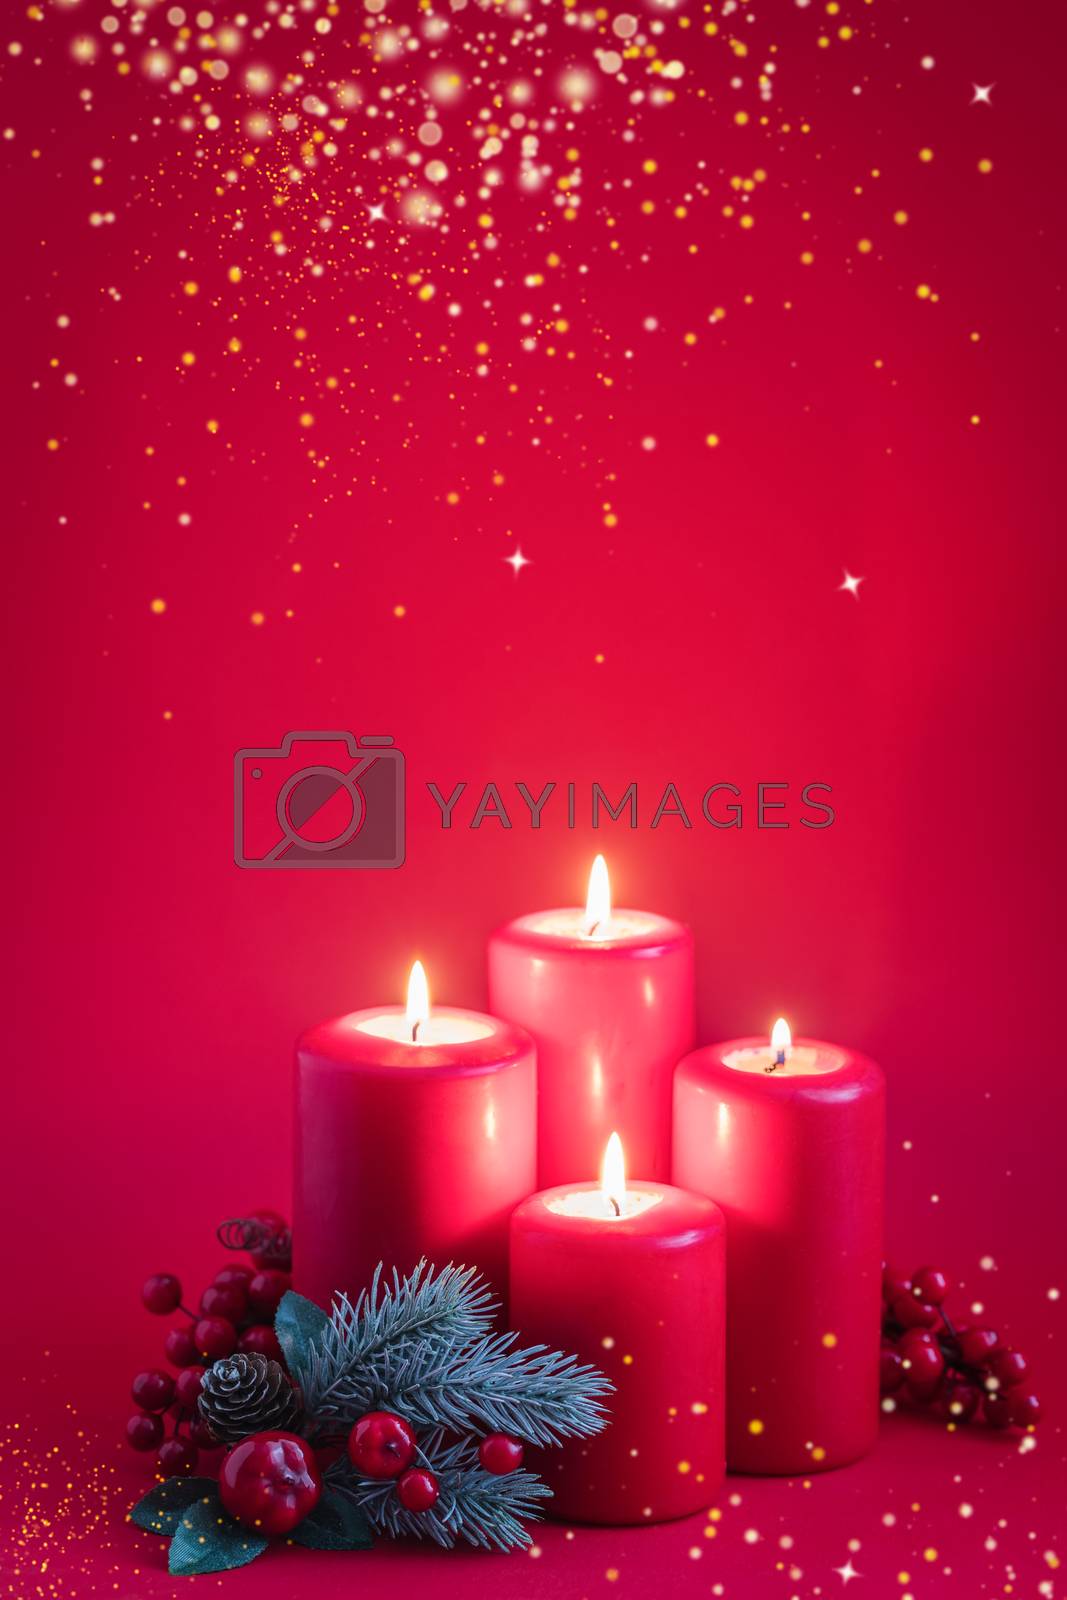 Royalty free image of Four red burning advent candles, golden snowflakes and a green spruce branch on a red background by Katia1504